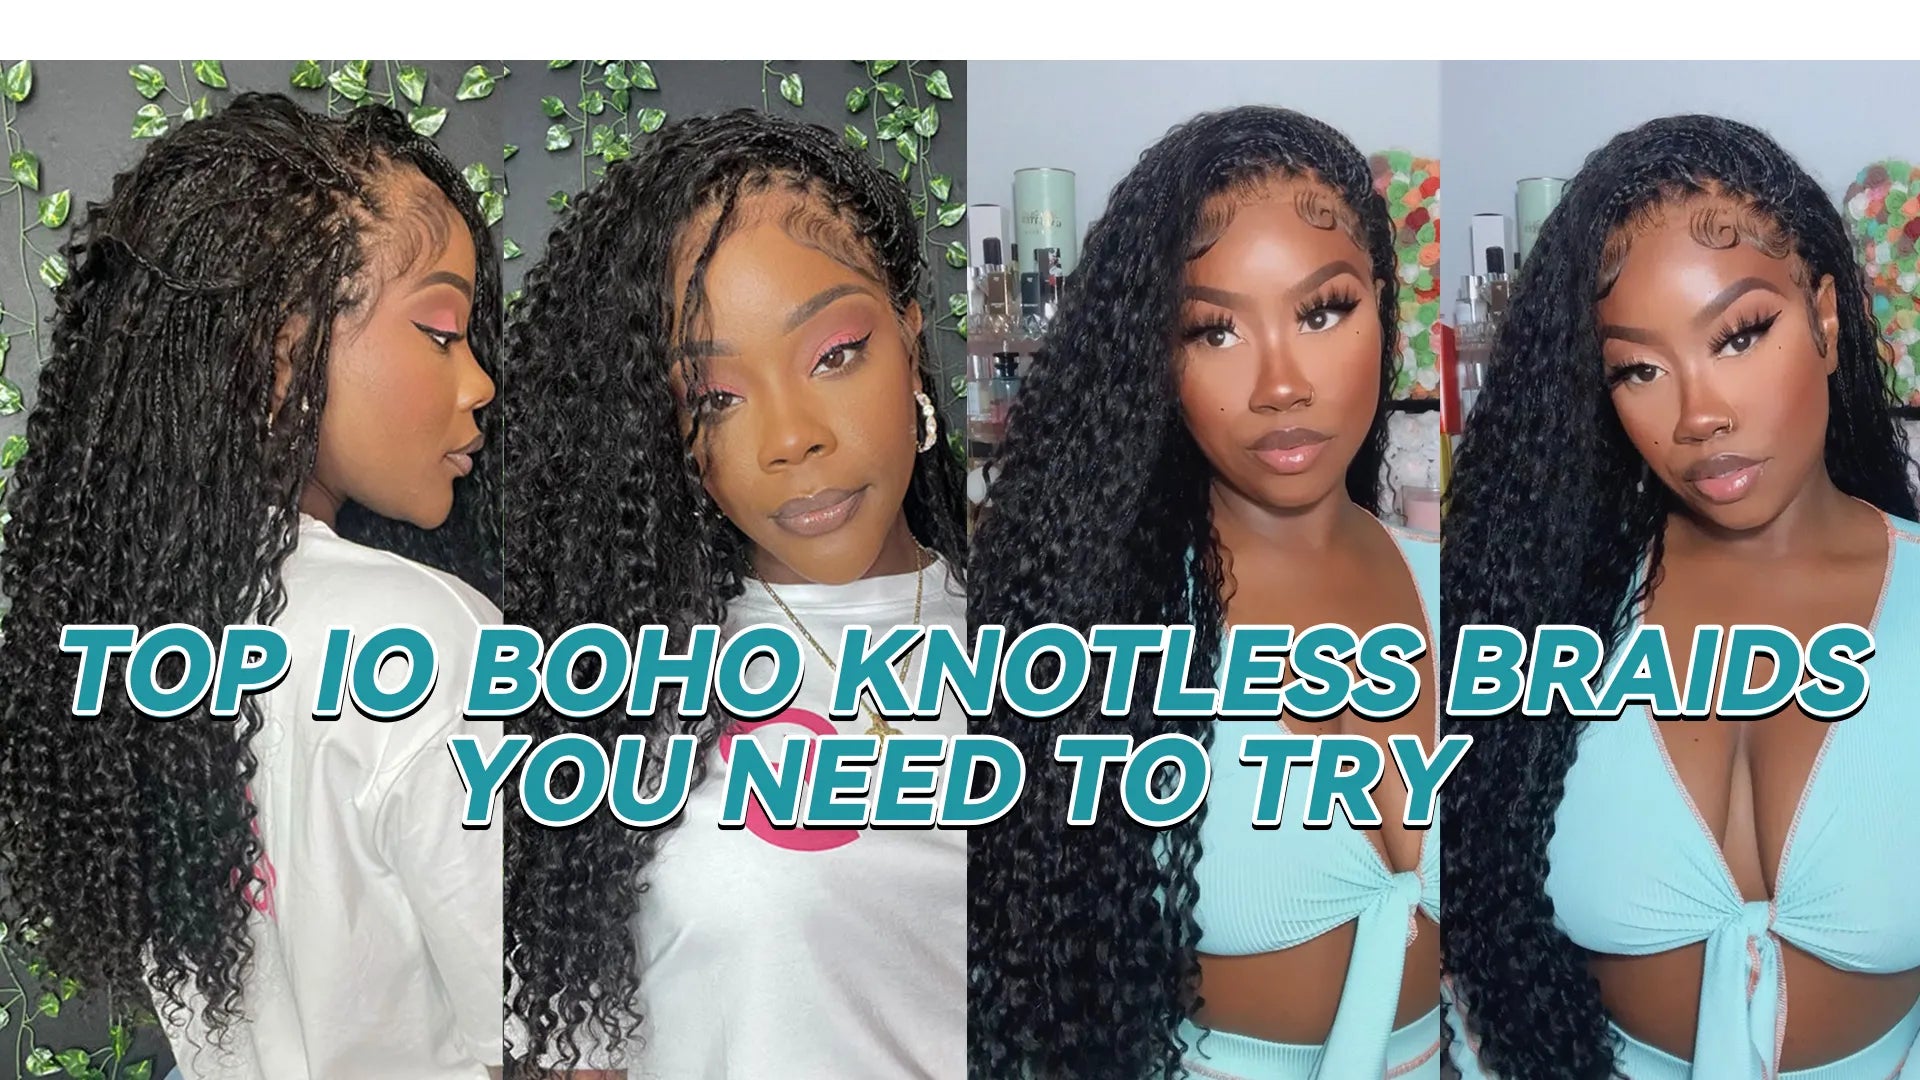 Top 10 Boho Knotless Braids You Need to Try